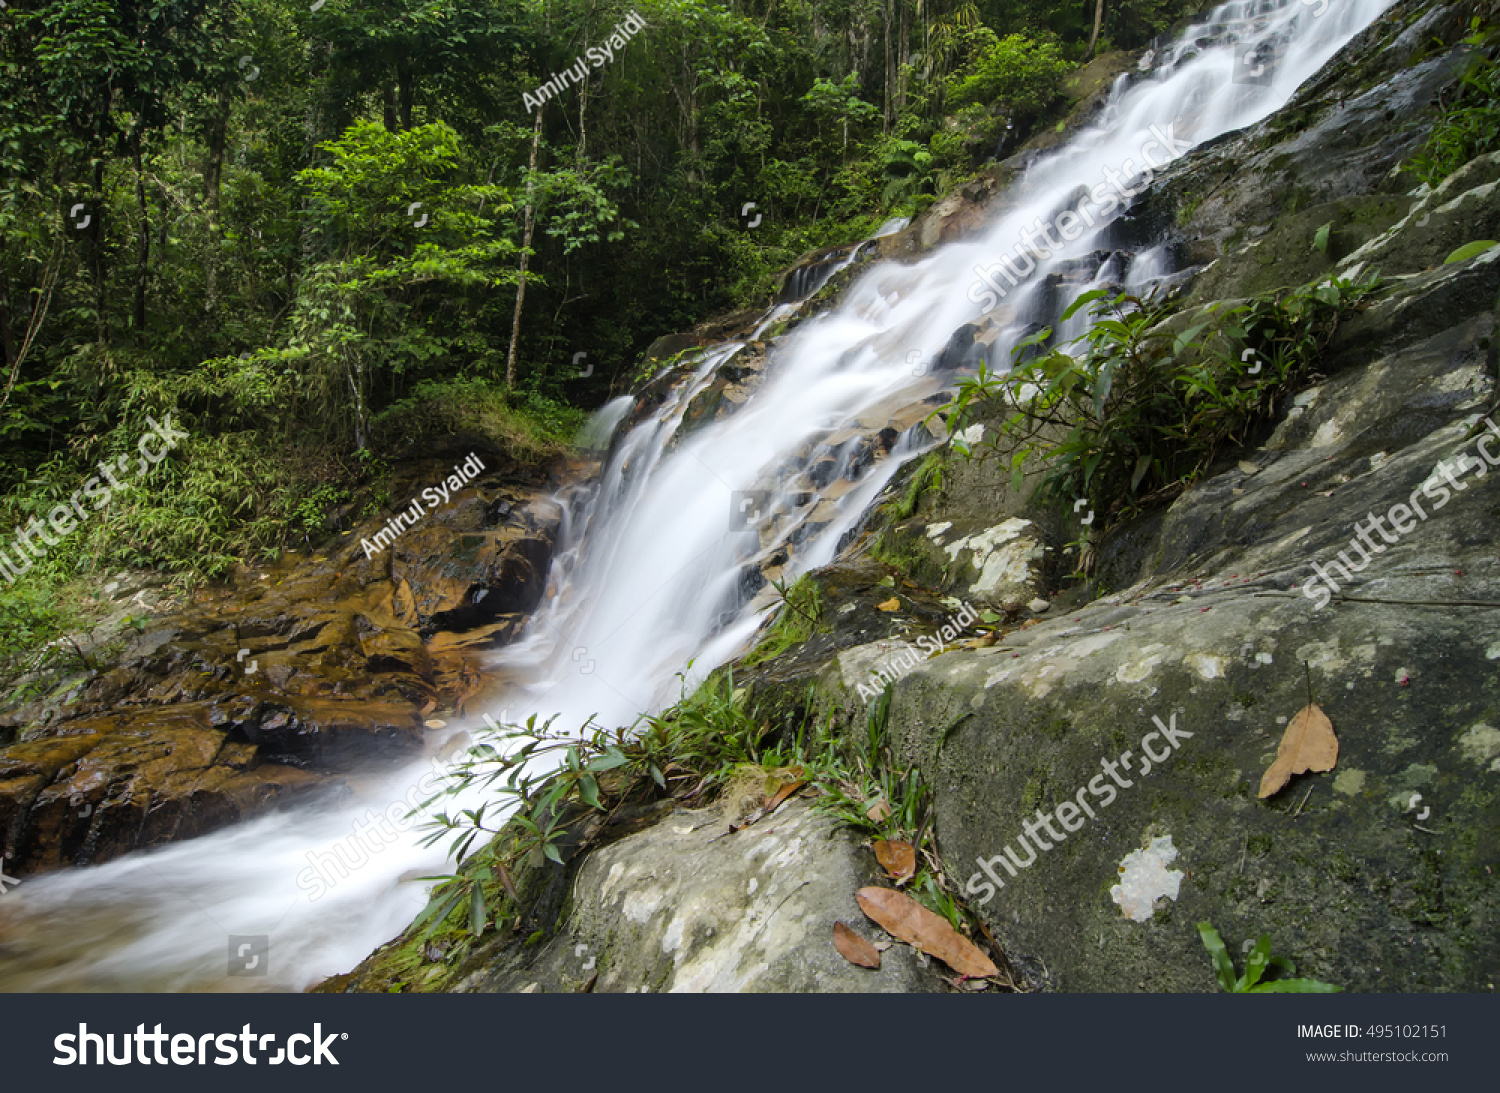 beautiful in nature, amazing cascading tropical waterfall. wet and mossy rock, surrounded by green rain forest #495102151